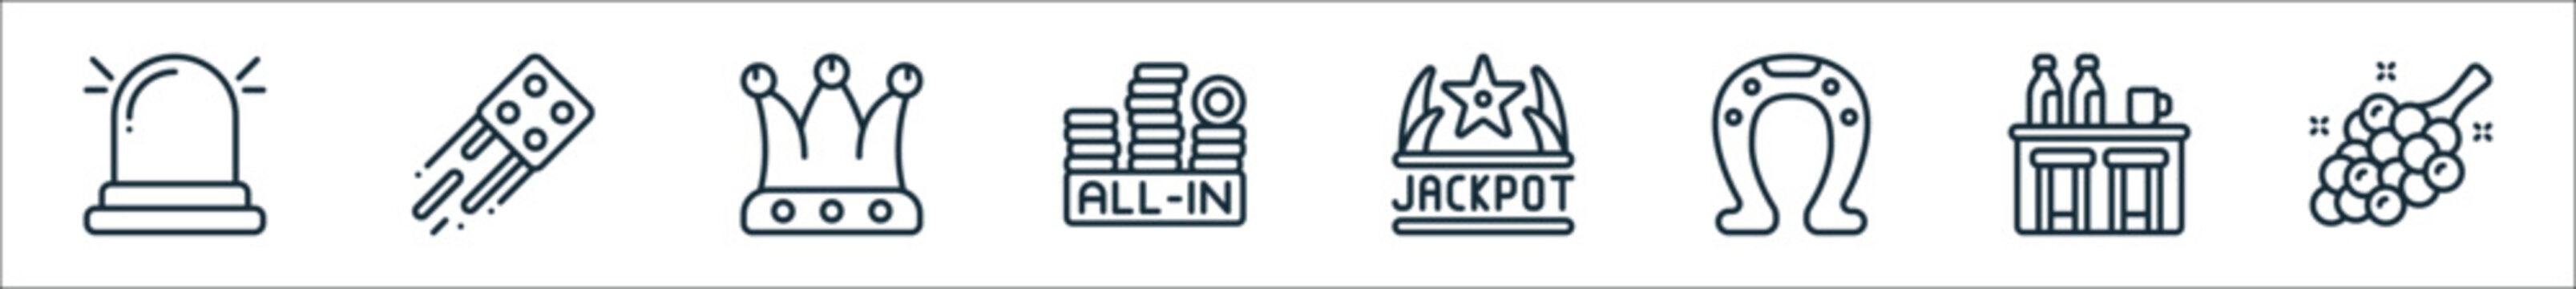 outline set of casino line icons. linear vector icons such as alarm, dice, jester, all in, jackpot, horseshoe, bar, grapes